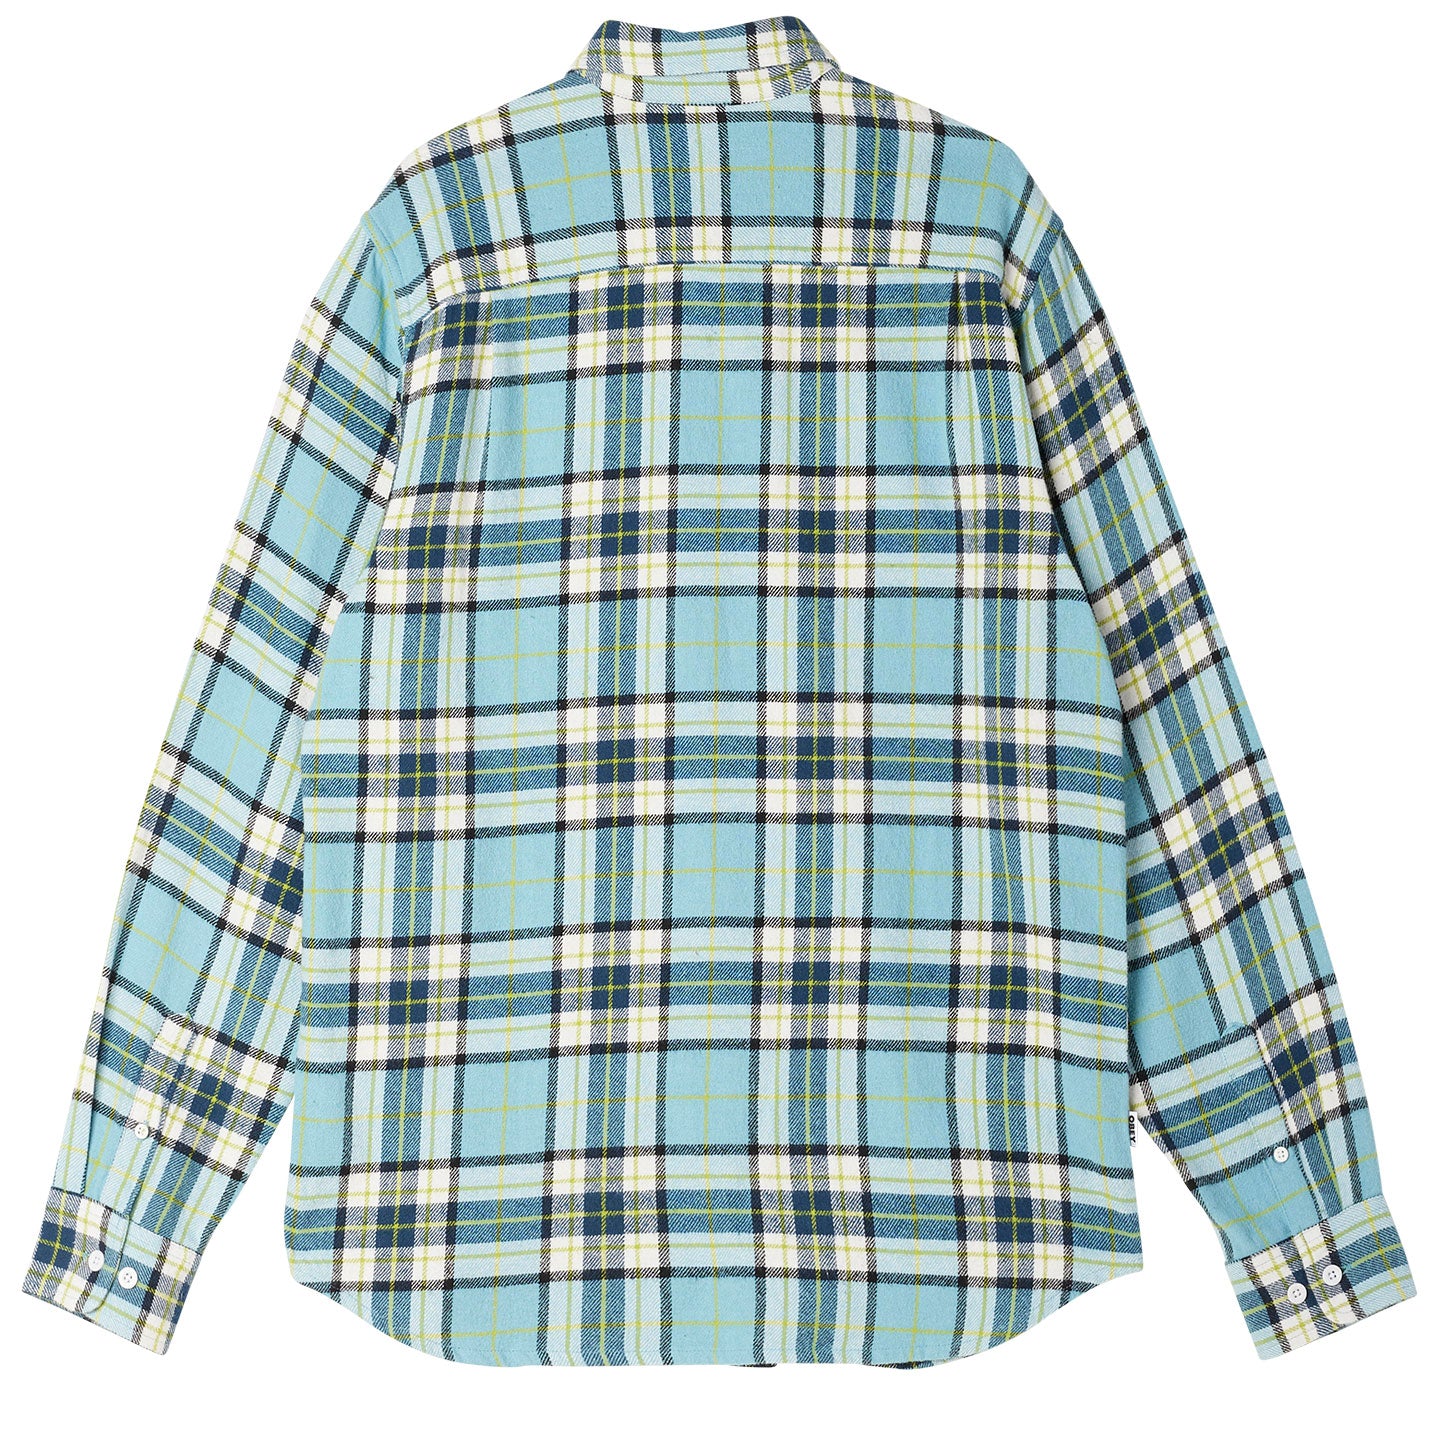 OBEY Vince Woven Shirt